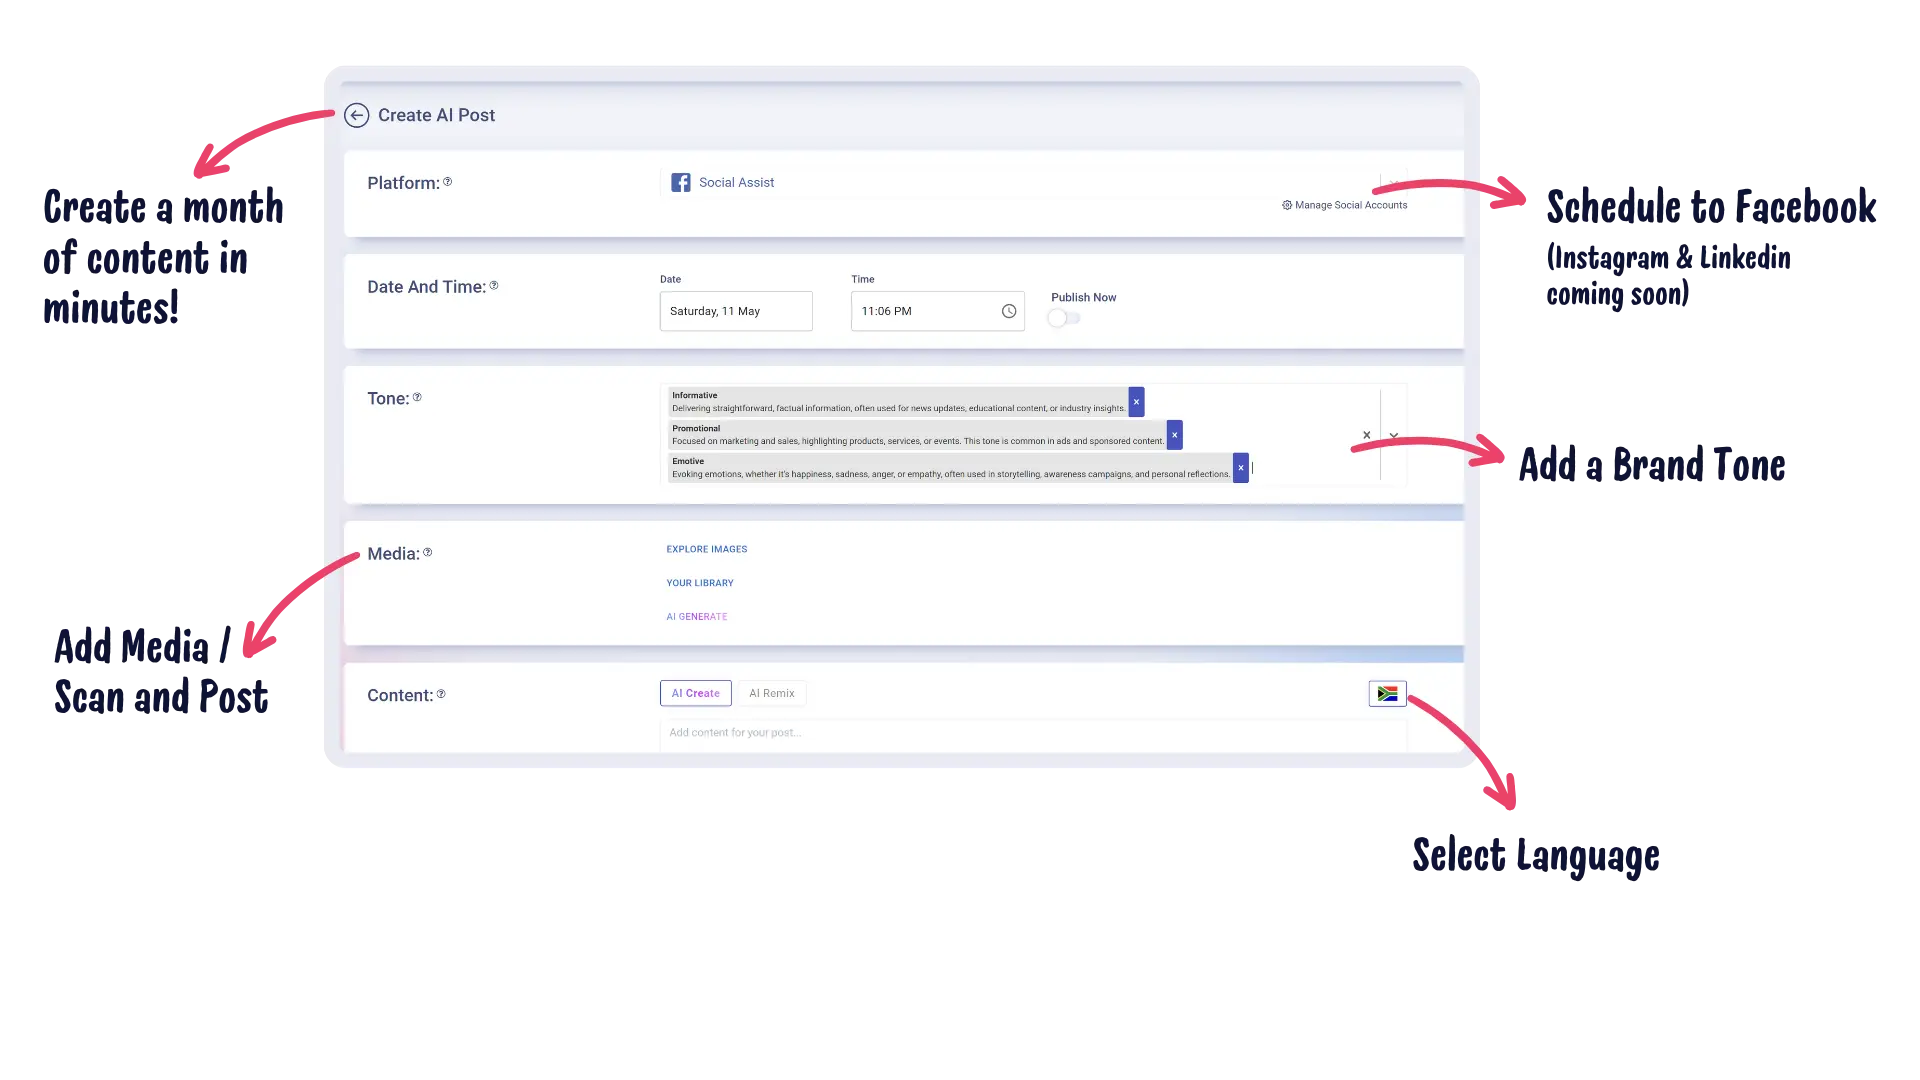 Social Assist Create Post And Features